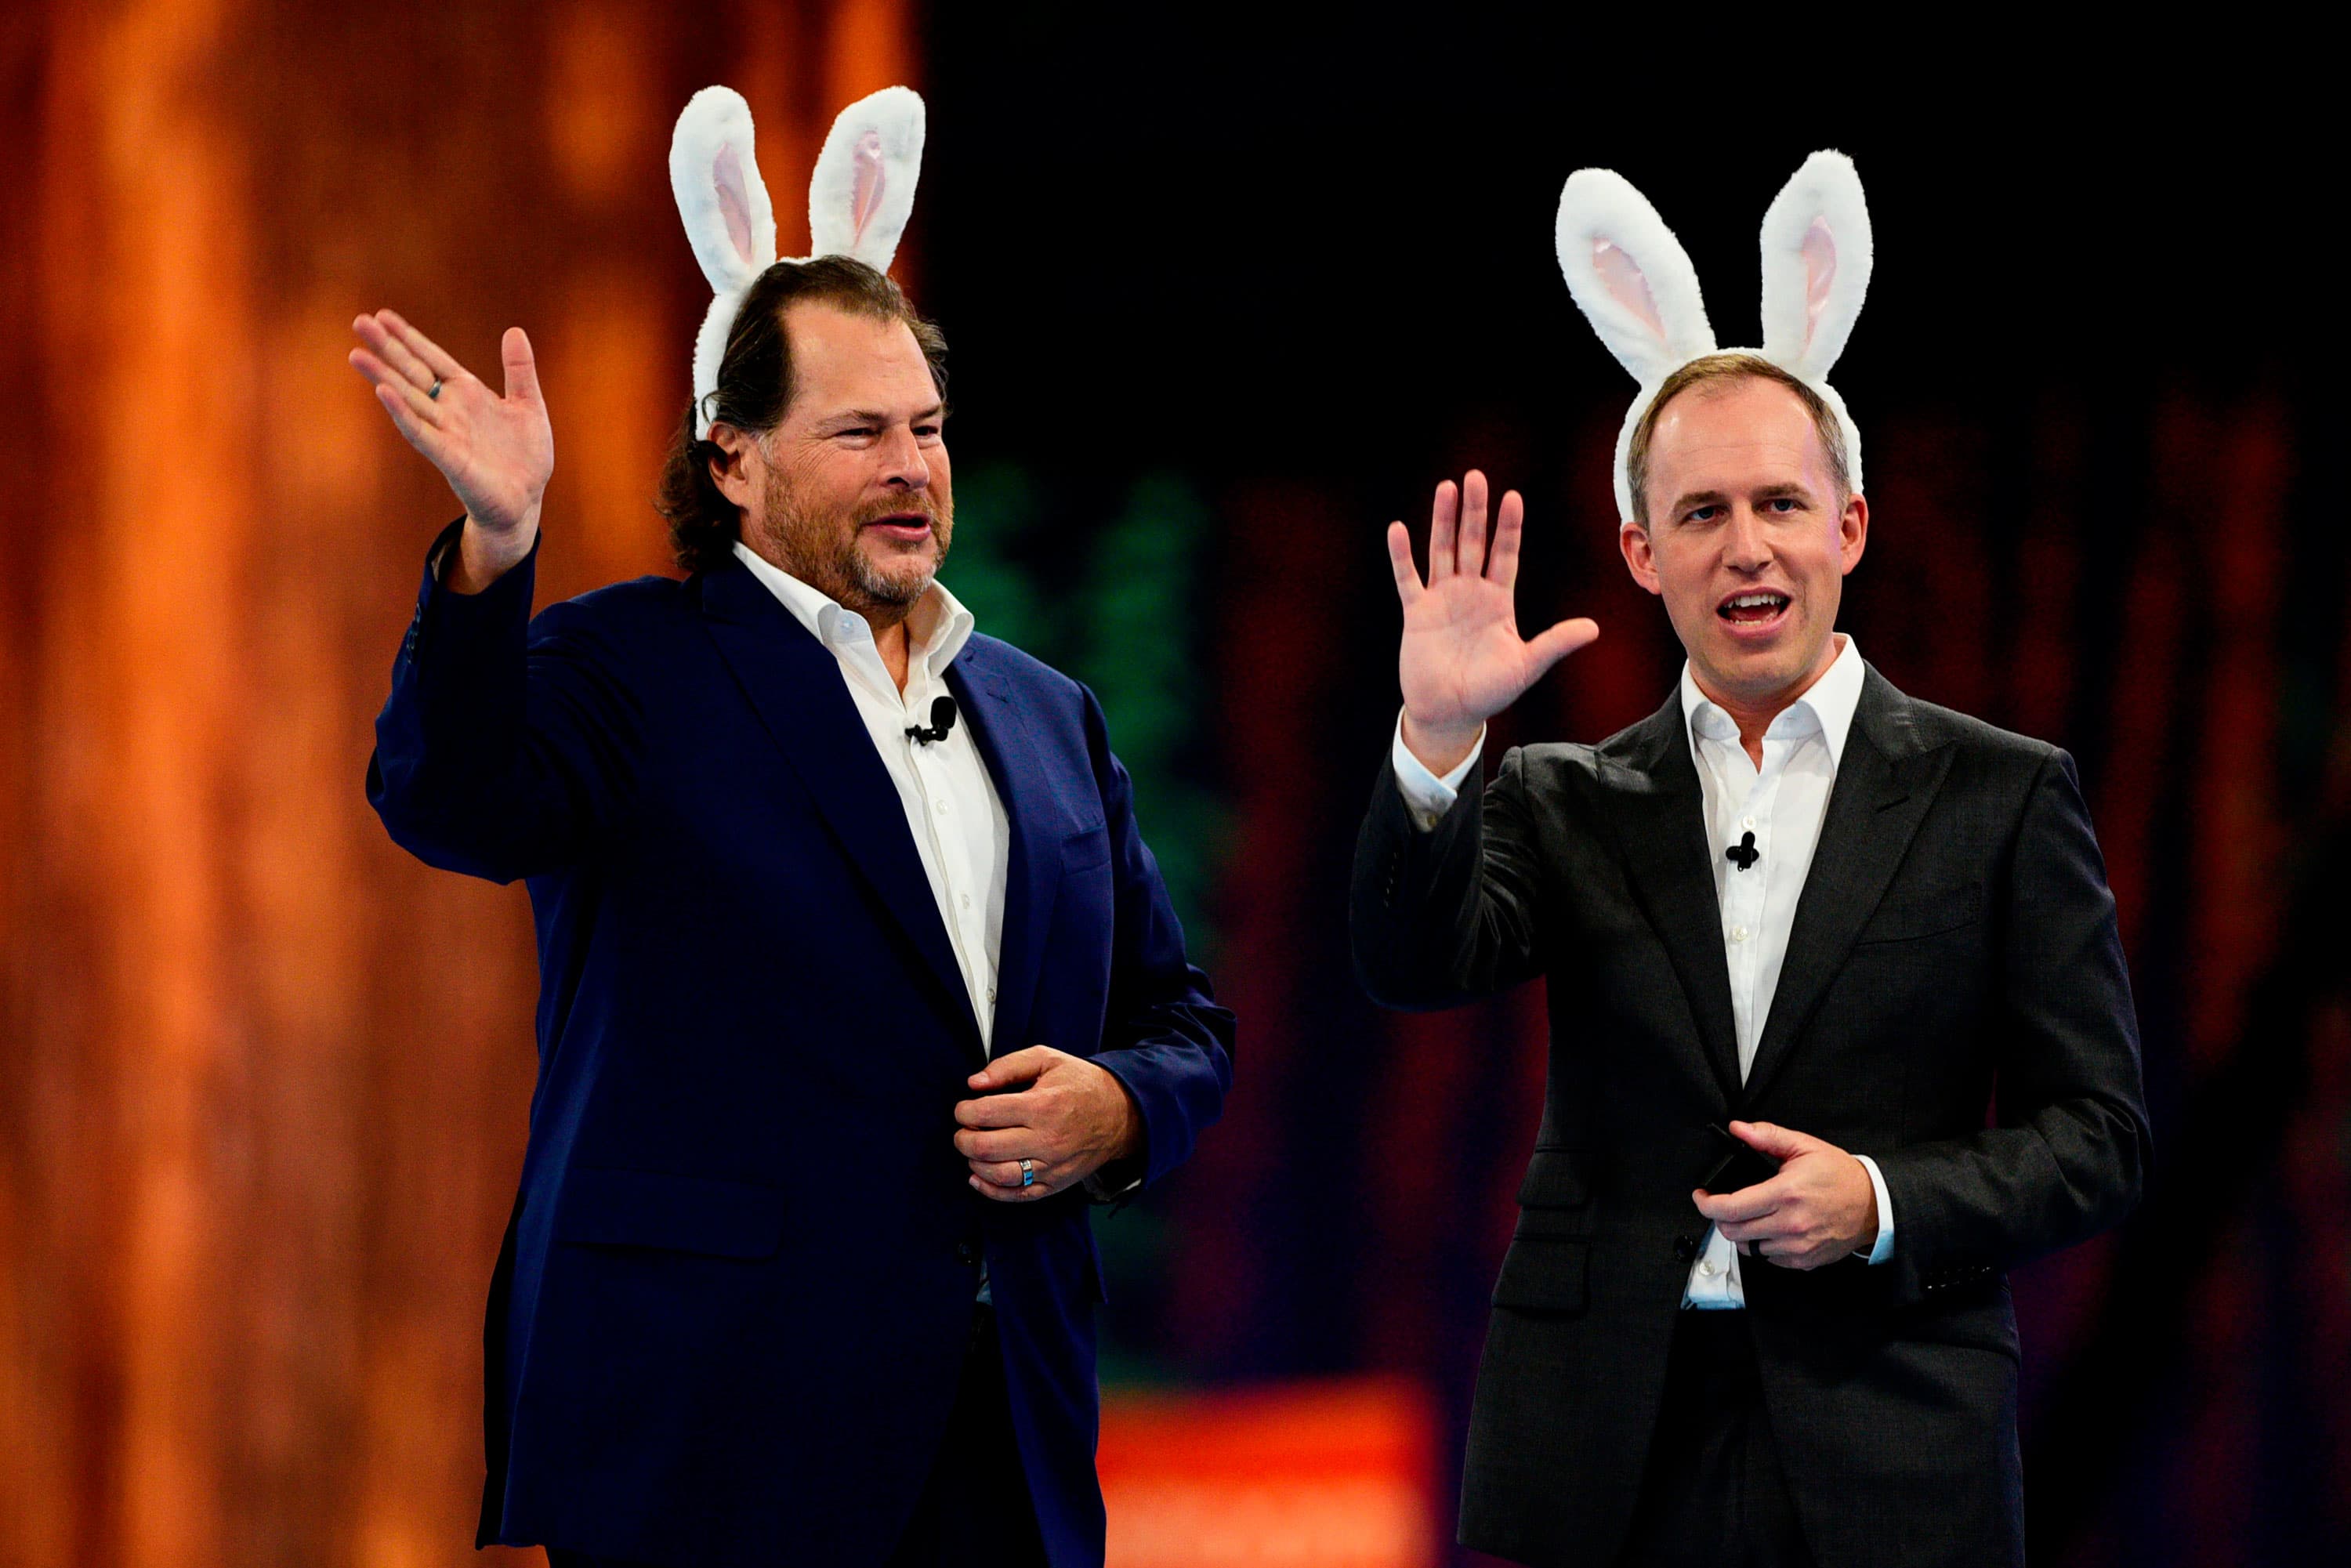 Jim Cramer sat down with Salesforce and Slack CEOs this week - here are our lessons learned